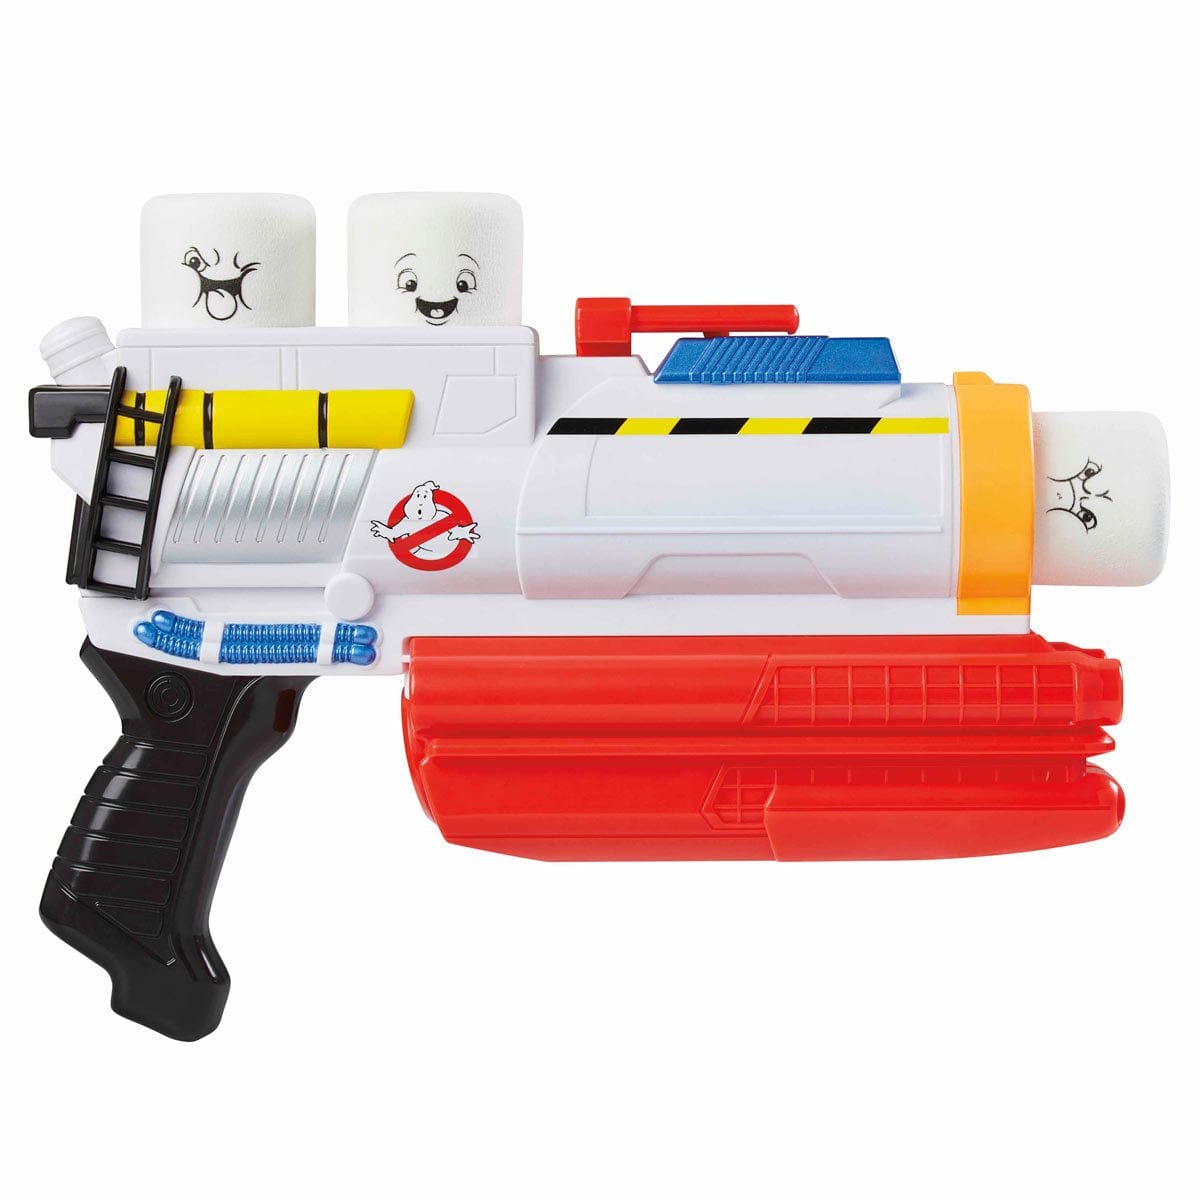 Hasbro Ghostbusters Afterlife Mini Puft Popper Blaster Roleplay Toy